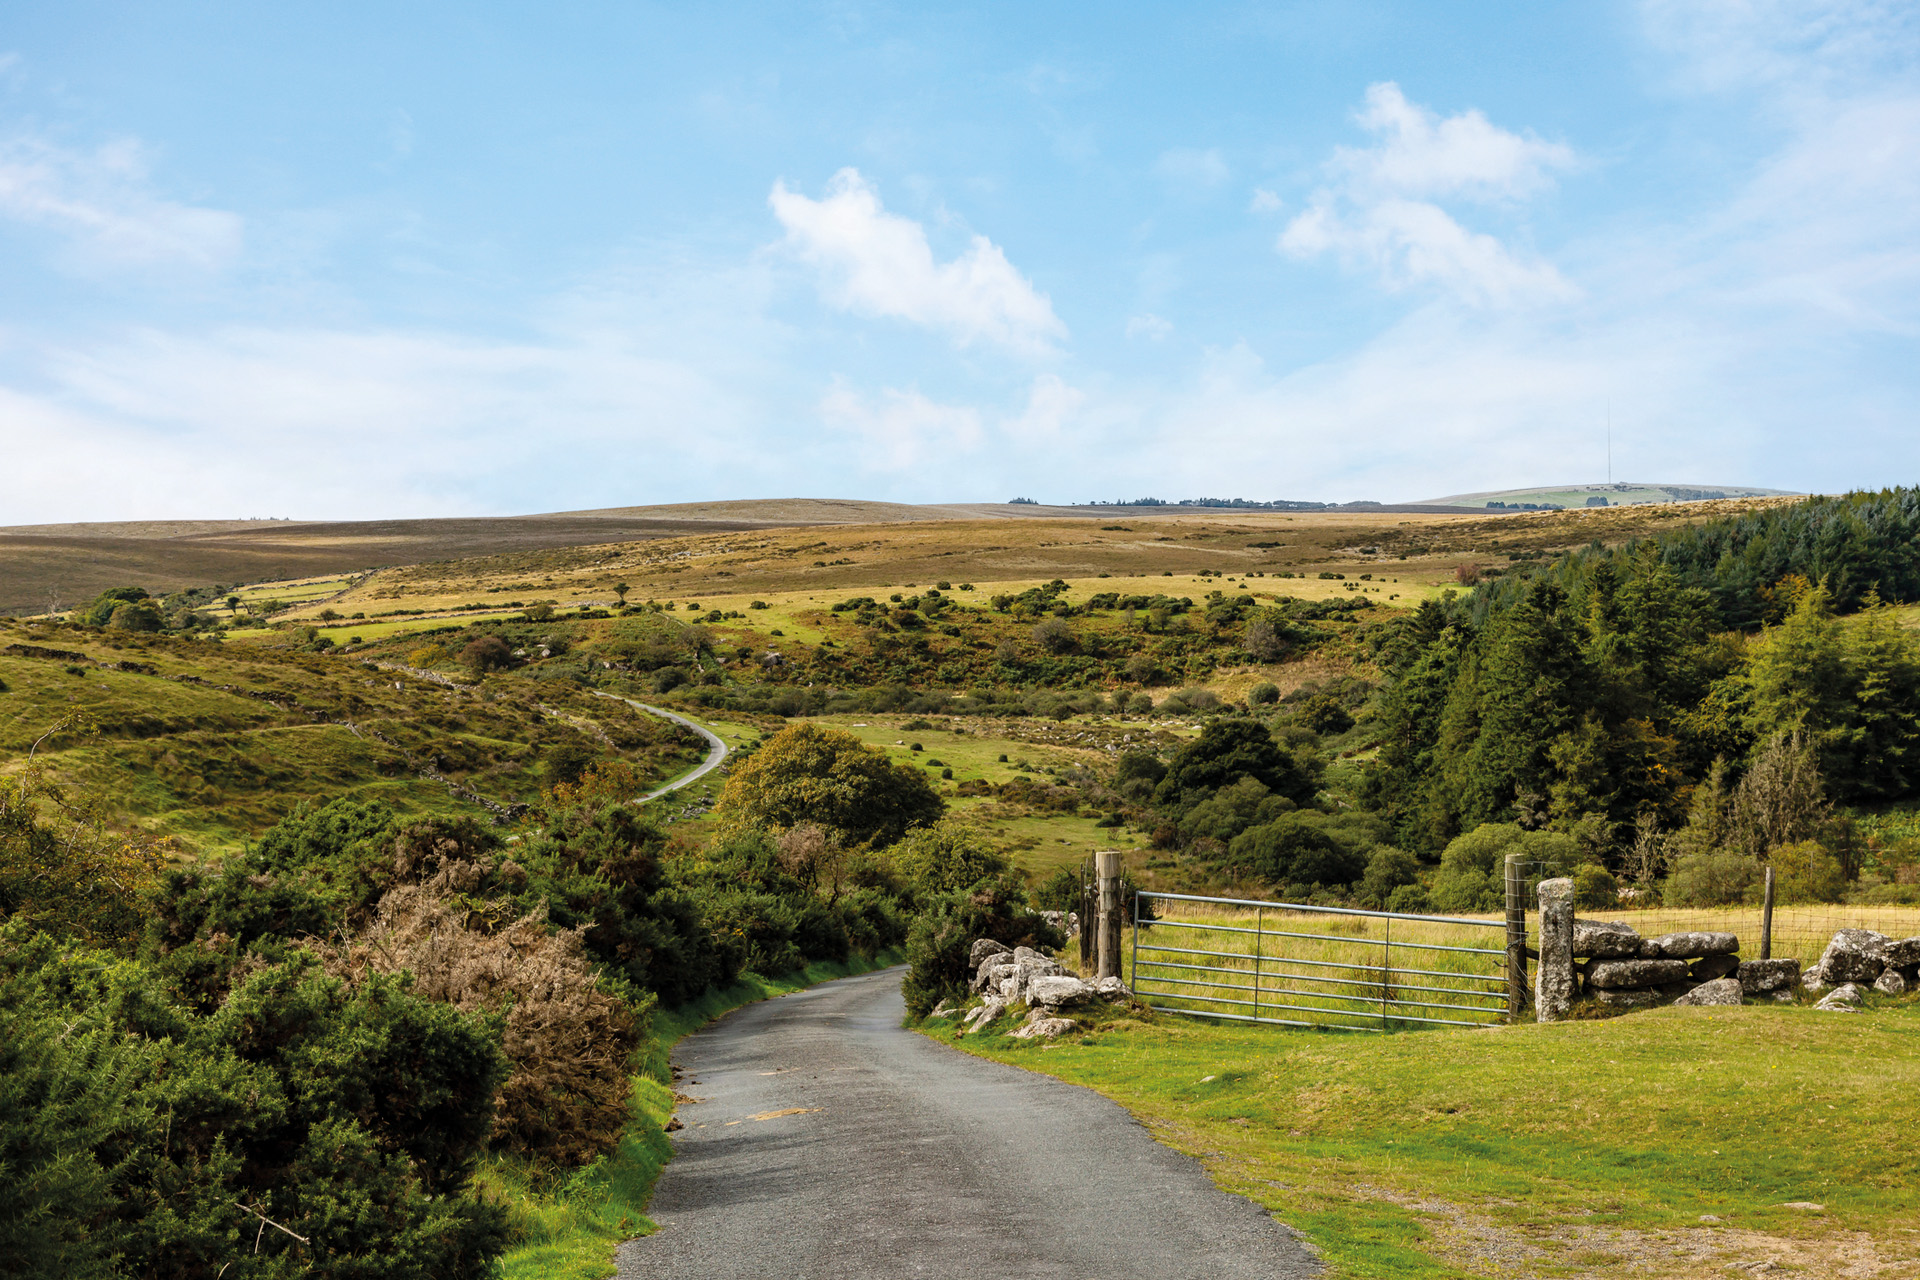 A view down a country road in Dartmoor National Park in Devon